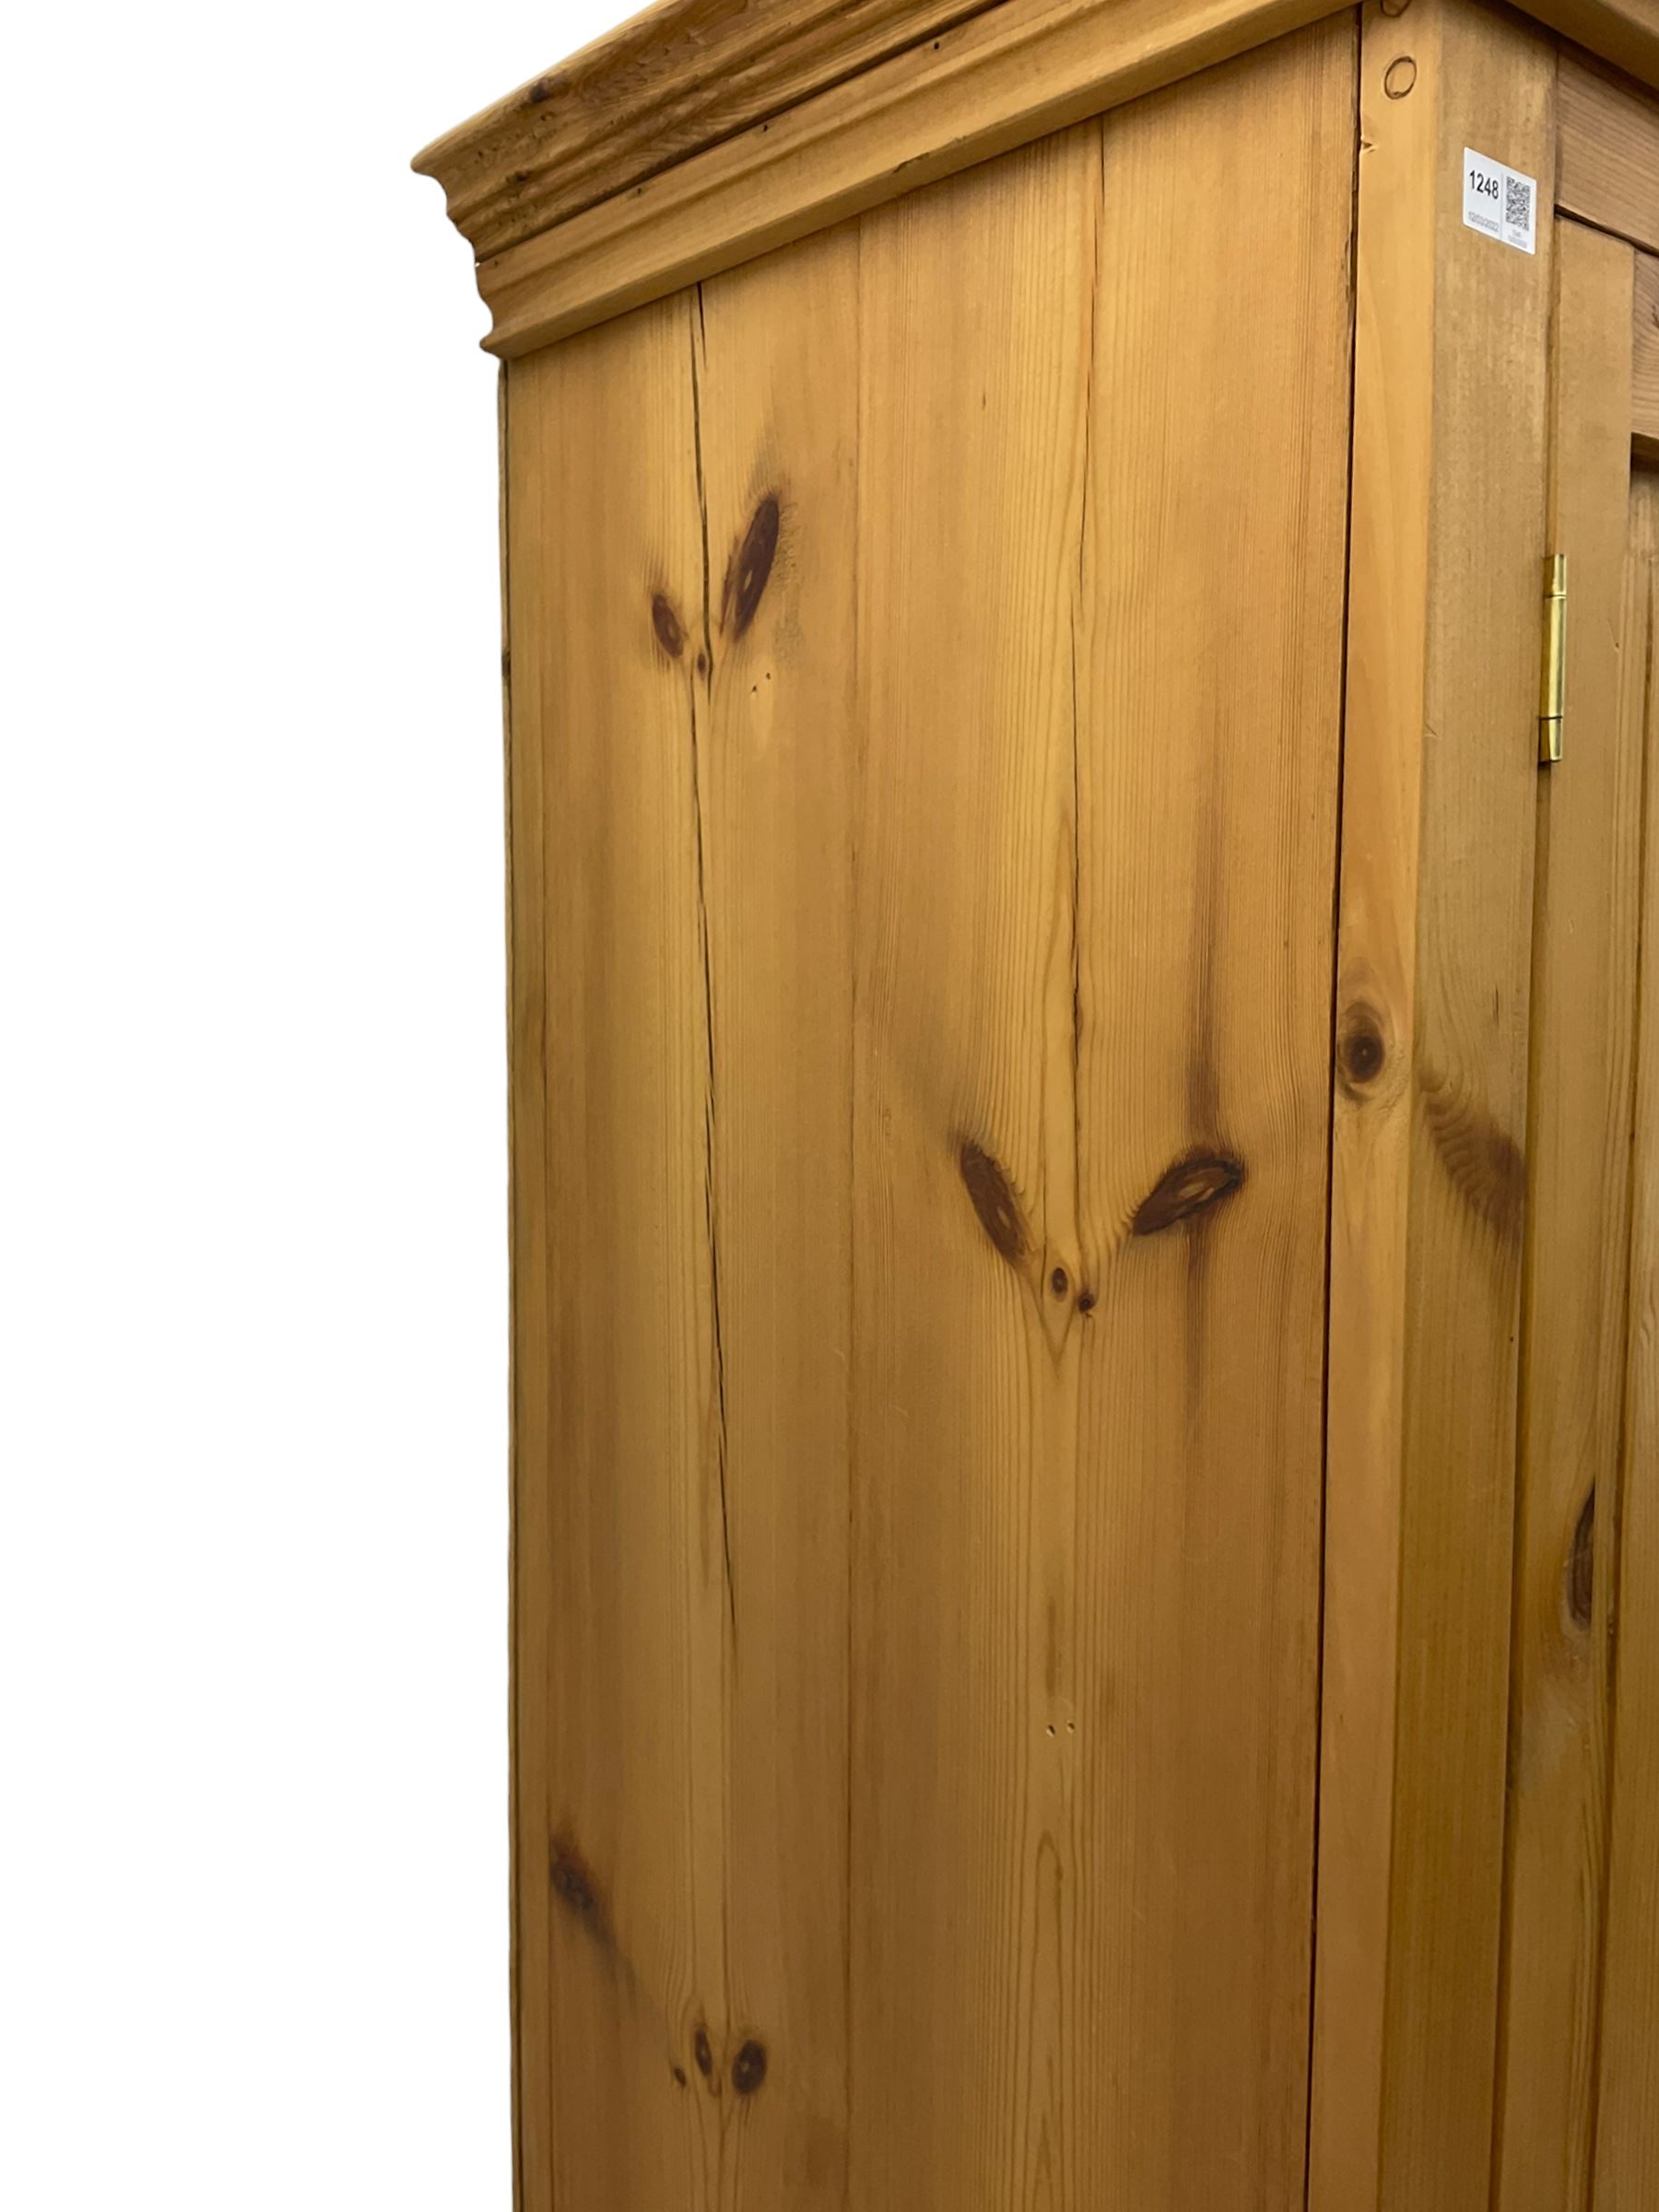 Solid pine double wardrobe - Image 6 of 8